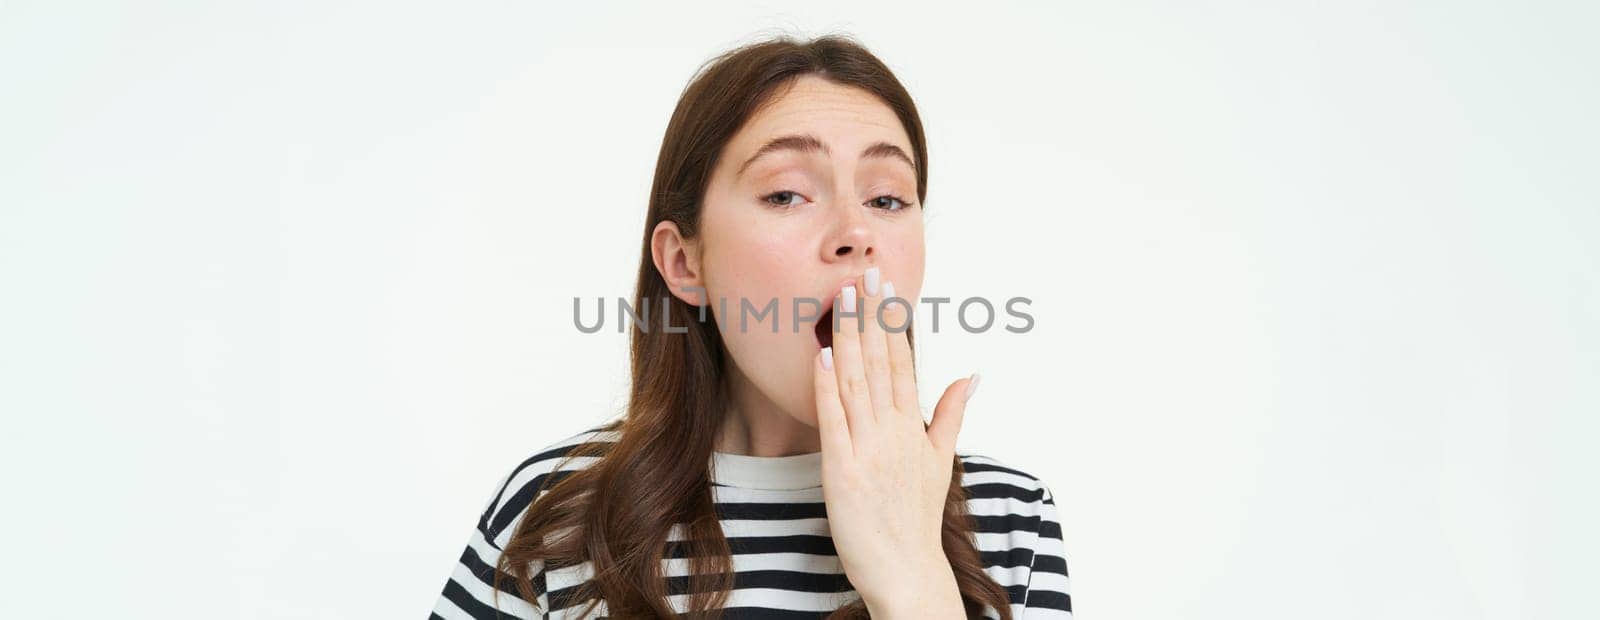 Portrait of girl yawning from boredom, covers her mouth with hand, looks sleepy, wakes up late, stands over white background.